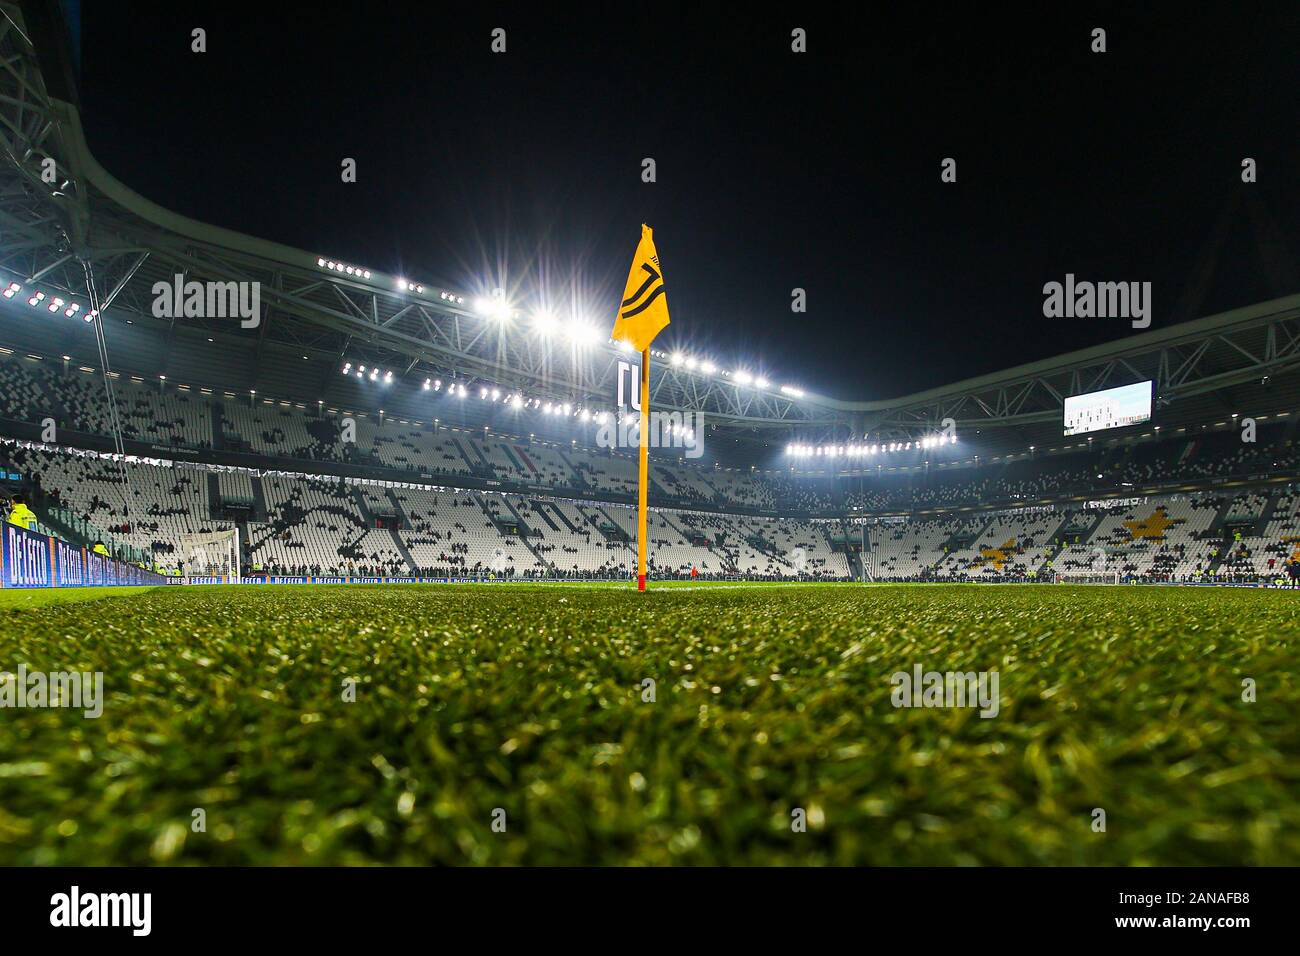 A General View Of Allianz Stadium Before The Italy Cup Football Match Between Juventus Fc And Udinese Calcio On January 15 2010 In Turin Italy Stock Photo Alamy